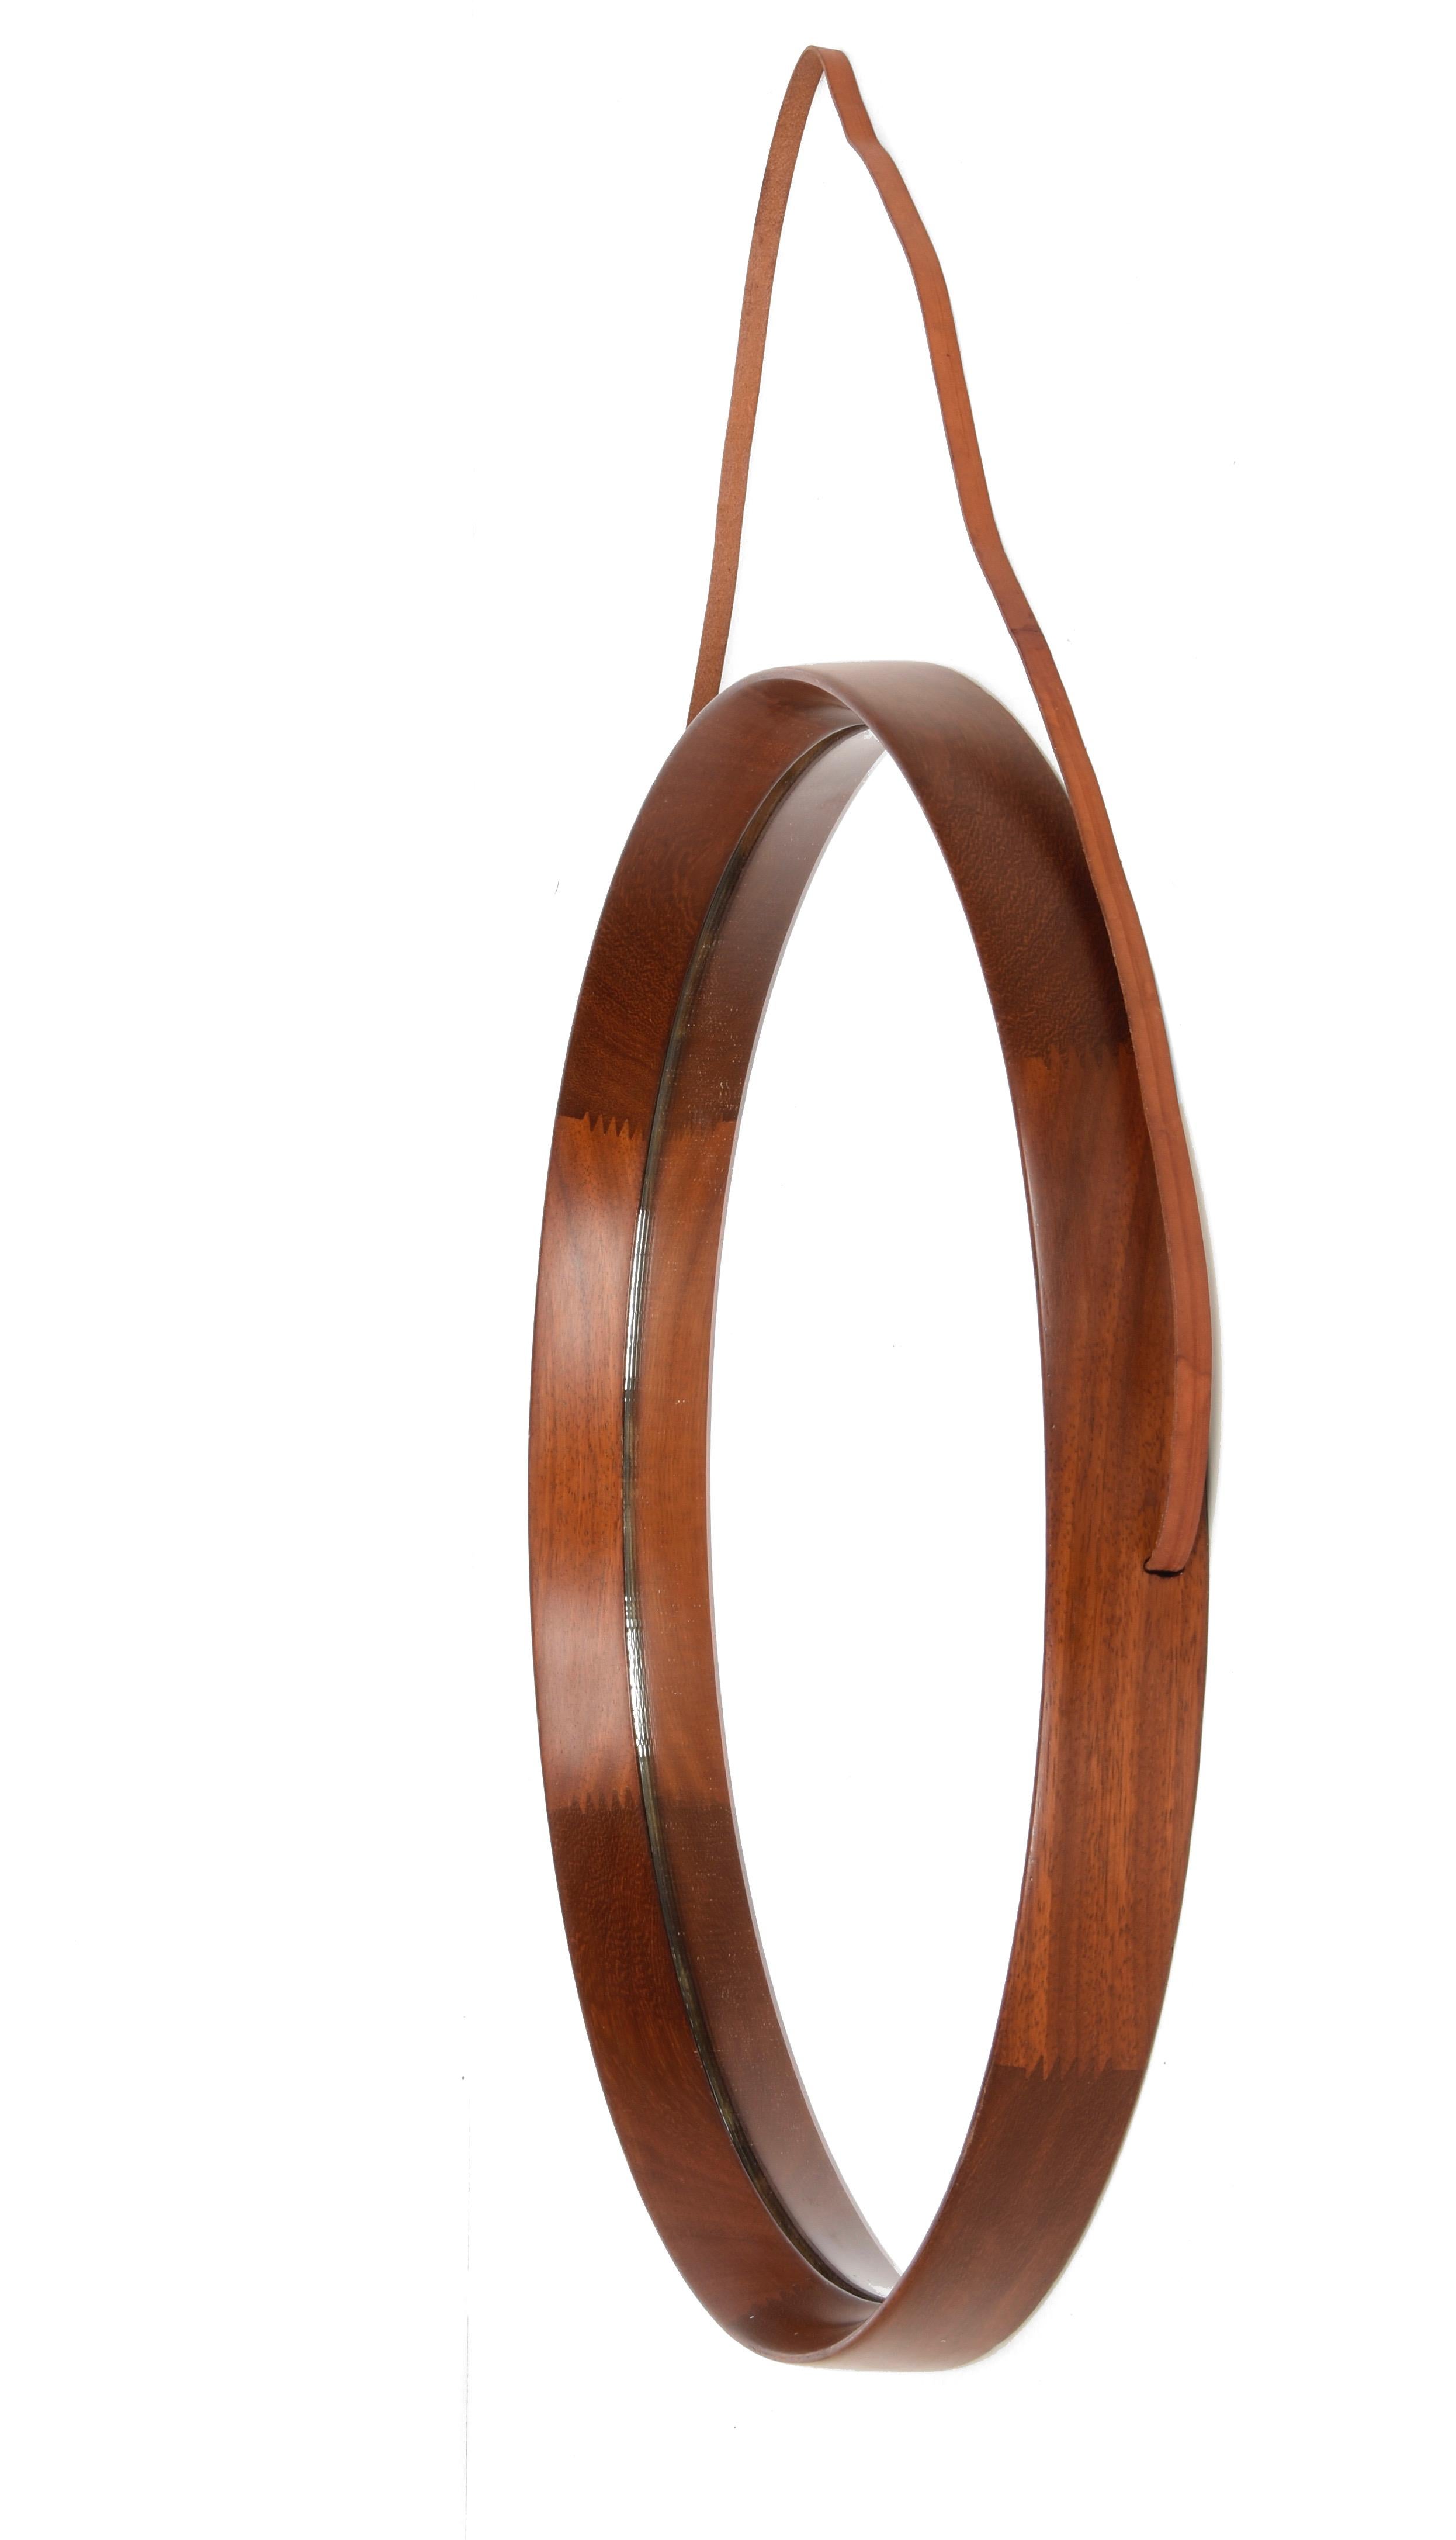 Uno & Östen Kristiansson Wood and Leather Swedish Wall Mirror for Luxus, 1960s For Sale 8